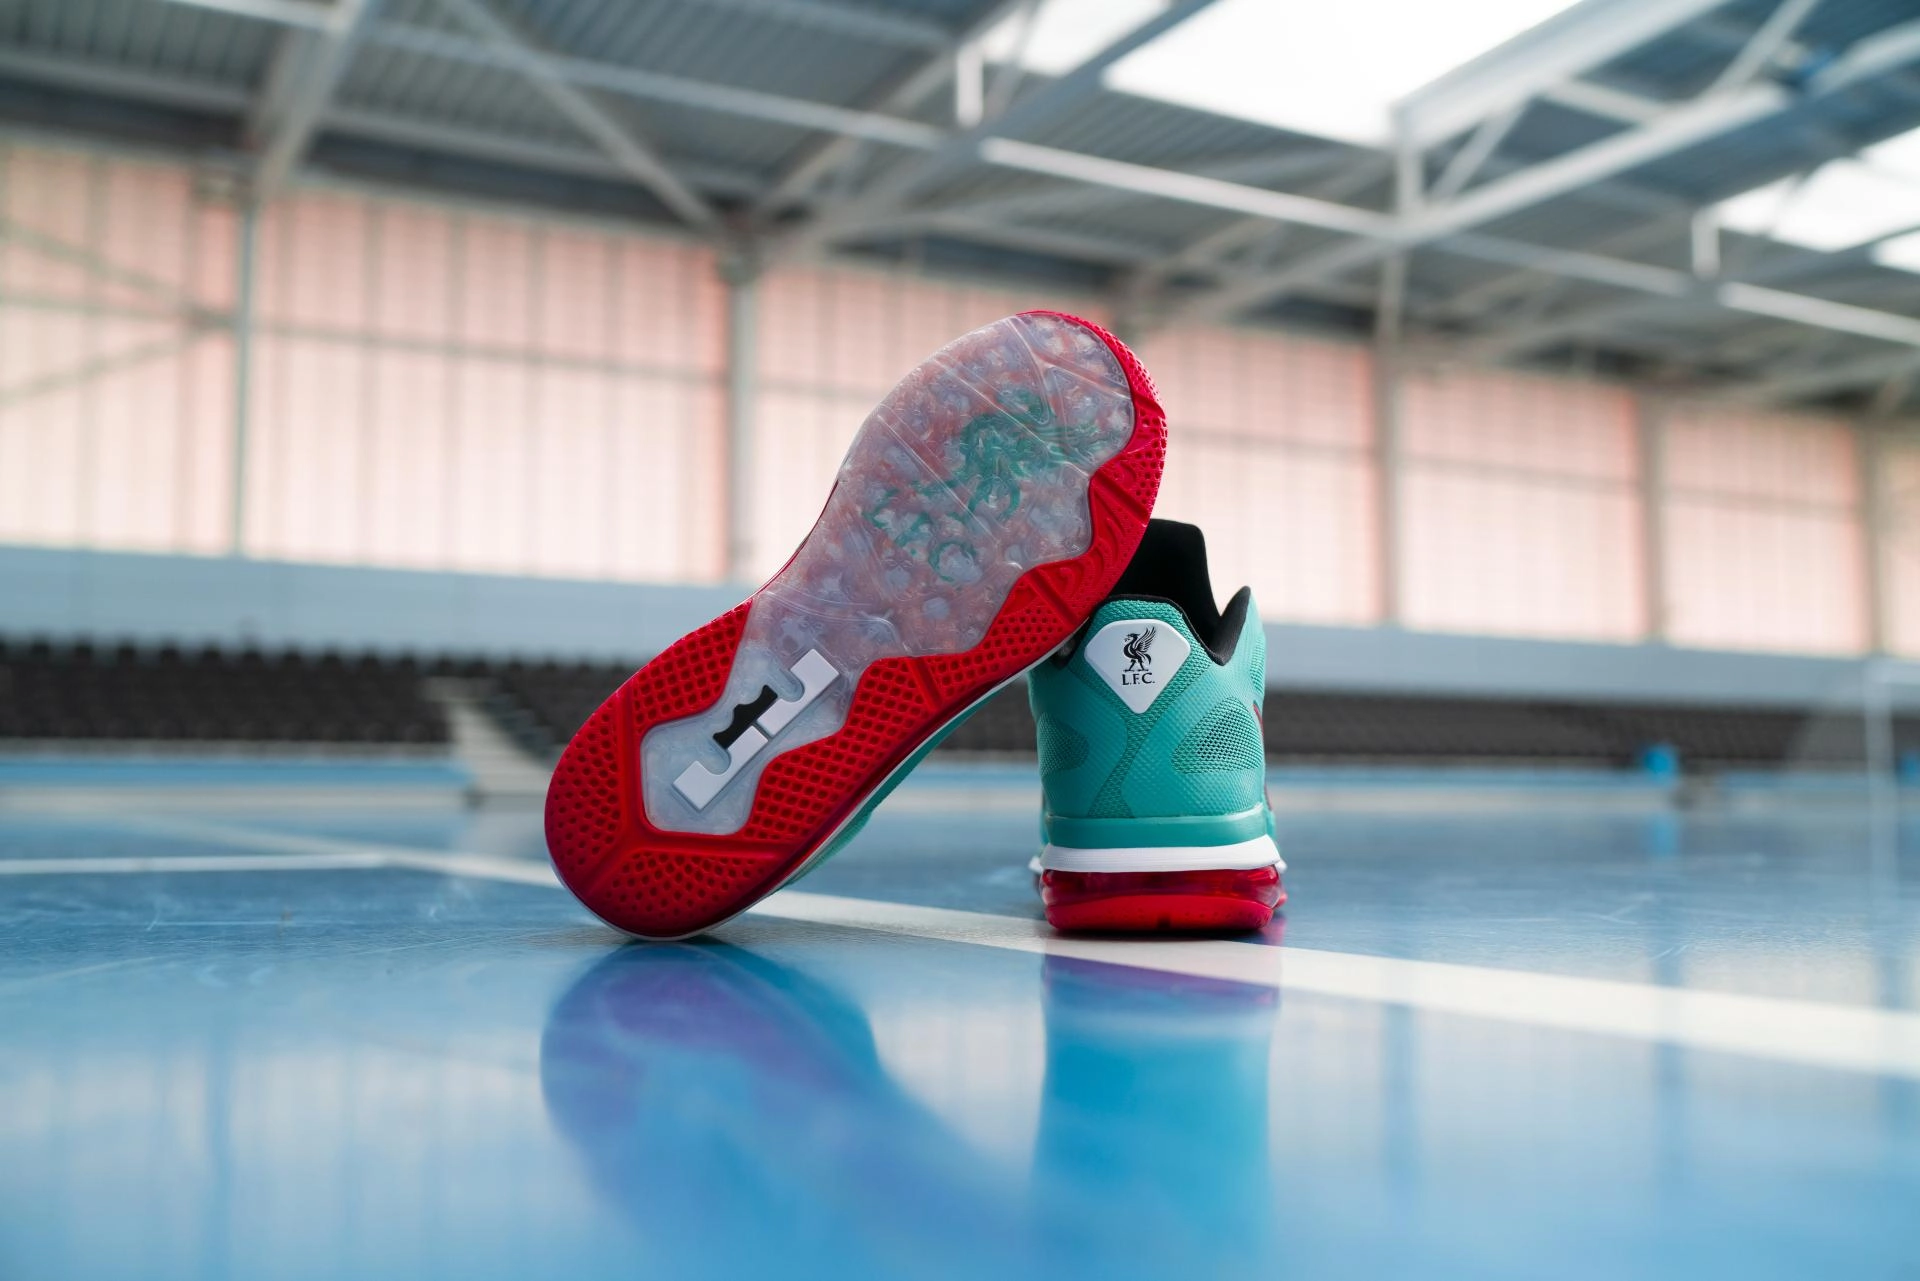 Liverpool FC — Shop the new Liverpool FC Nike LeBron 9 Low